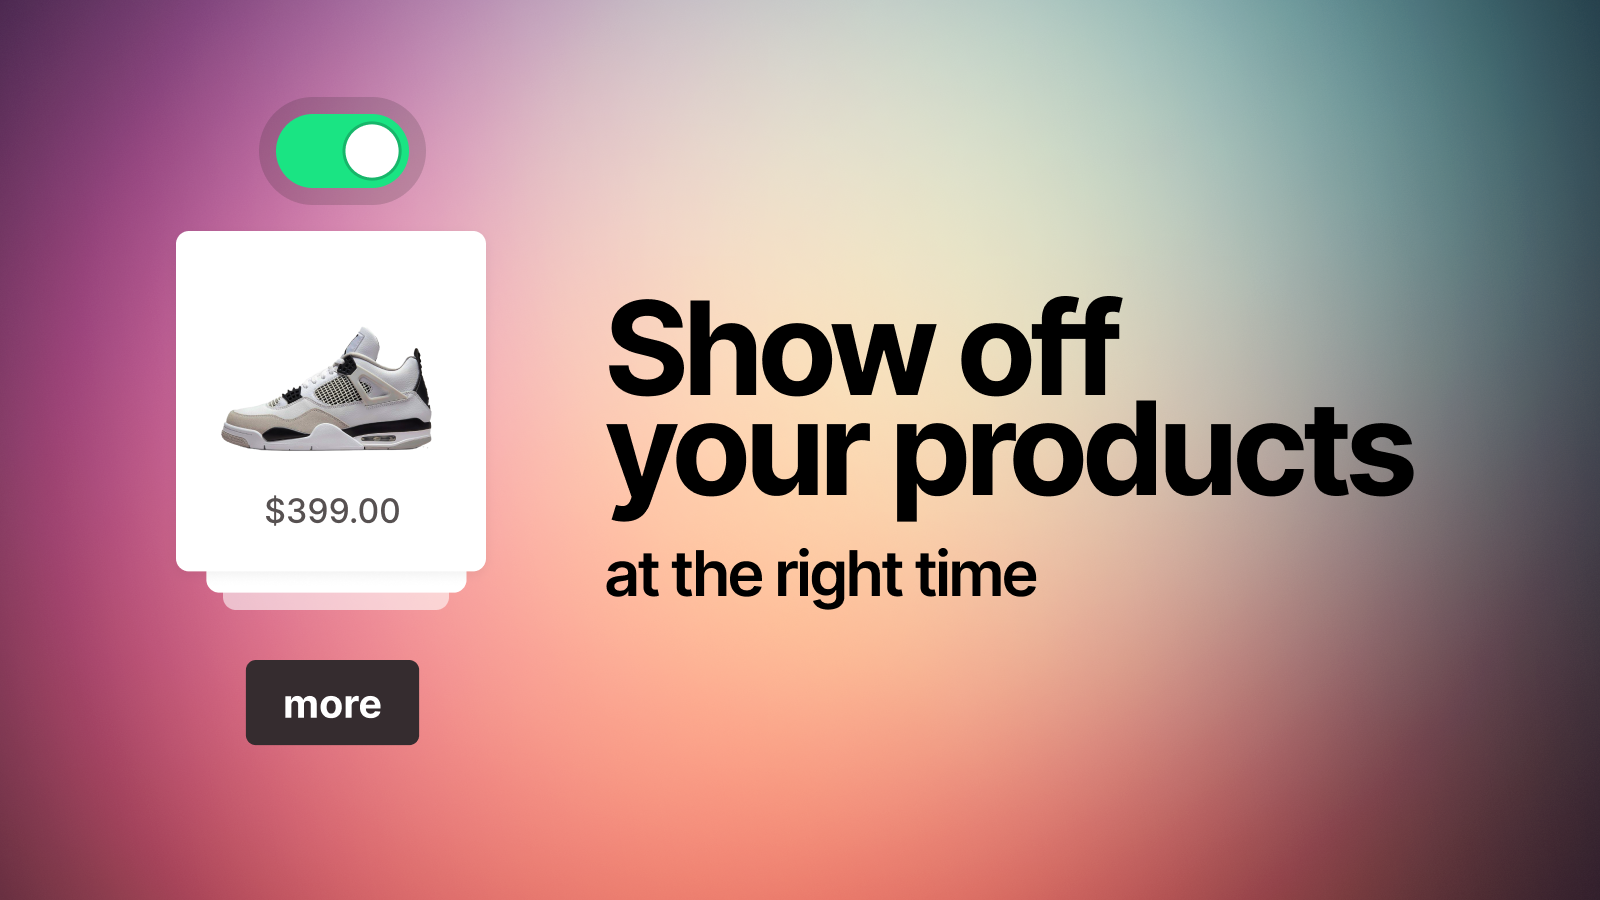 Display the products that are on live at the right time.